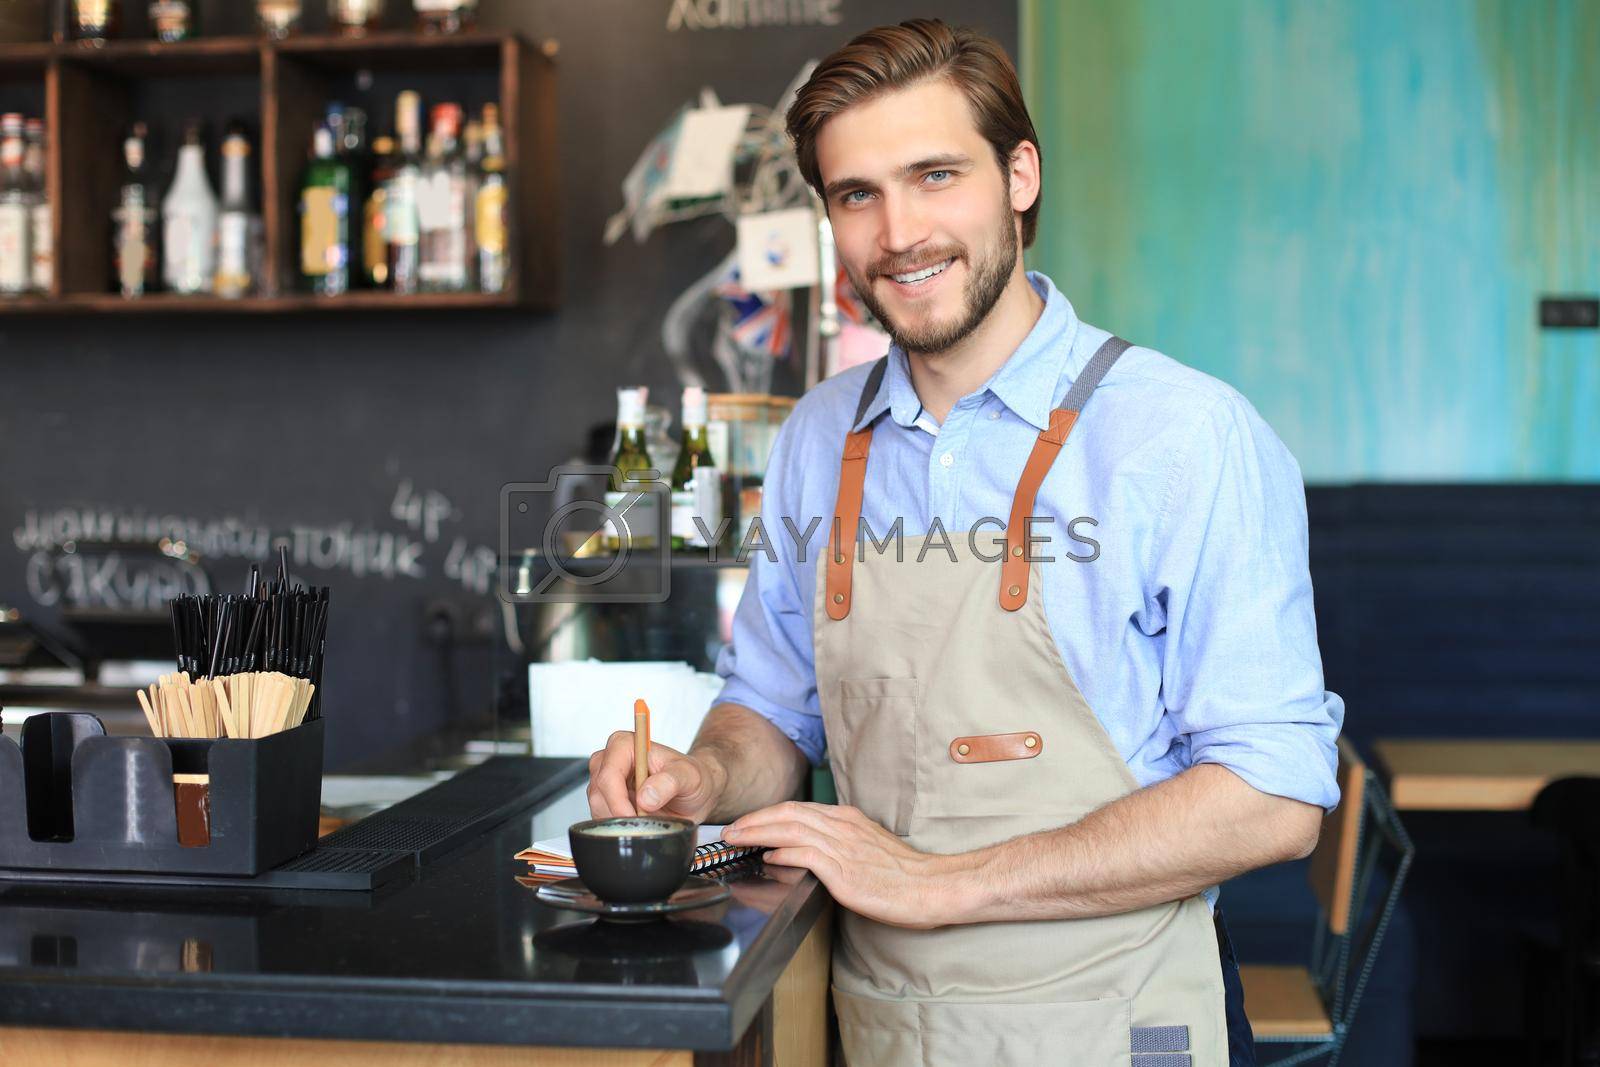 Royalty free image of Small business owner working at his cafe. by tsyhun